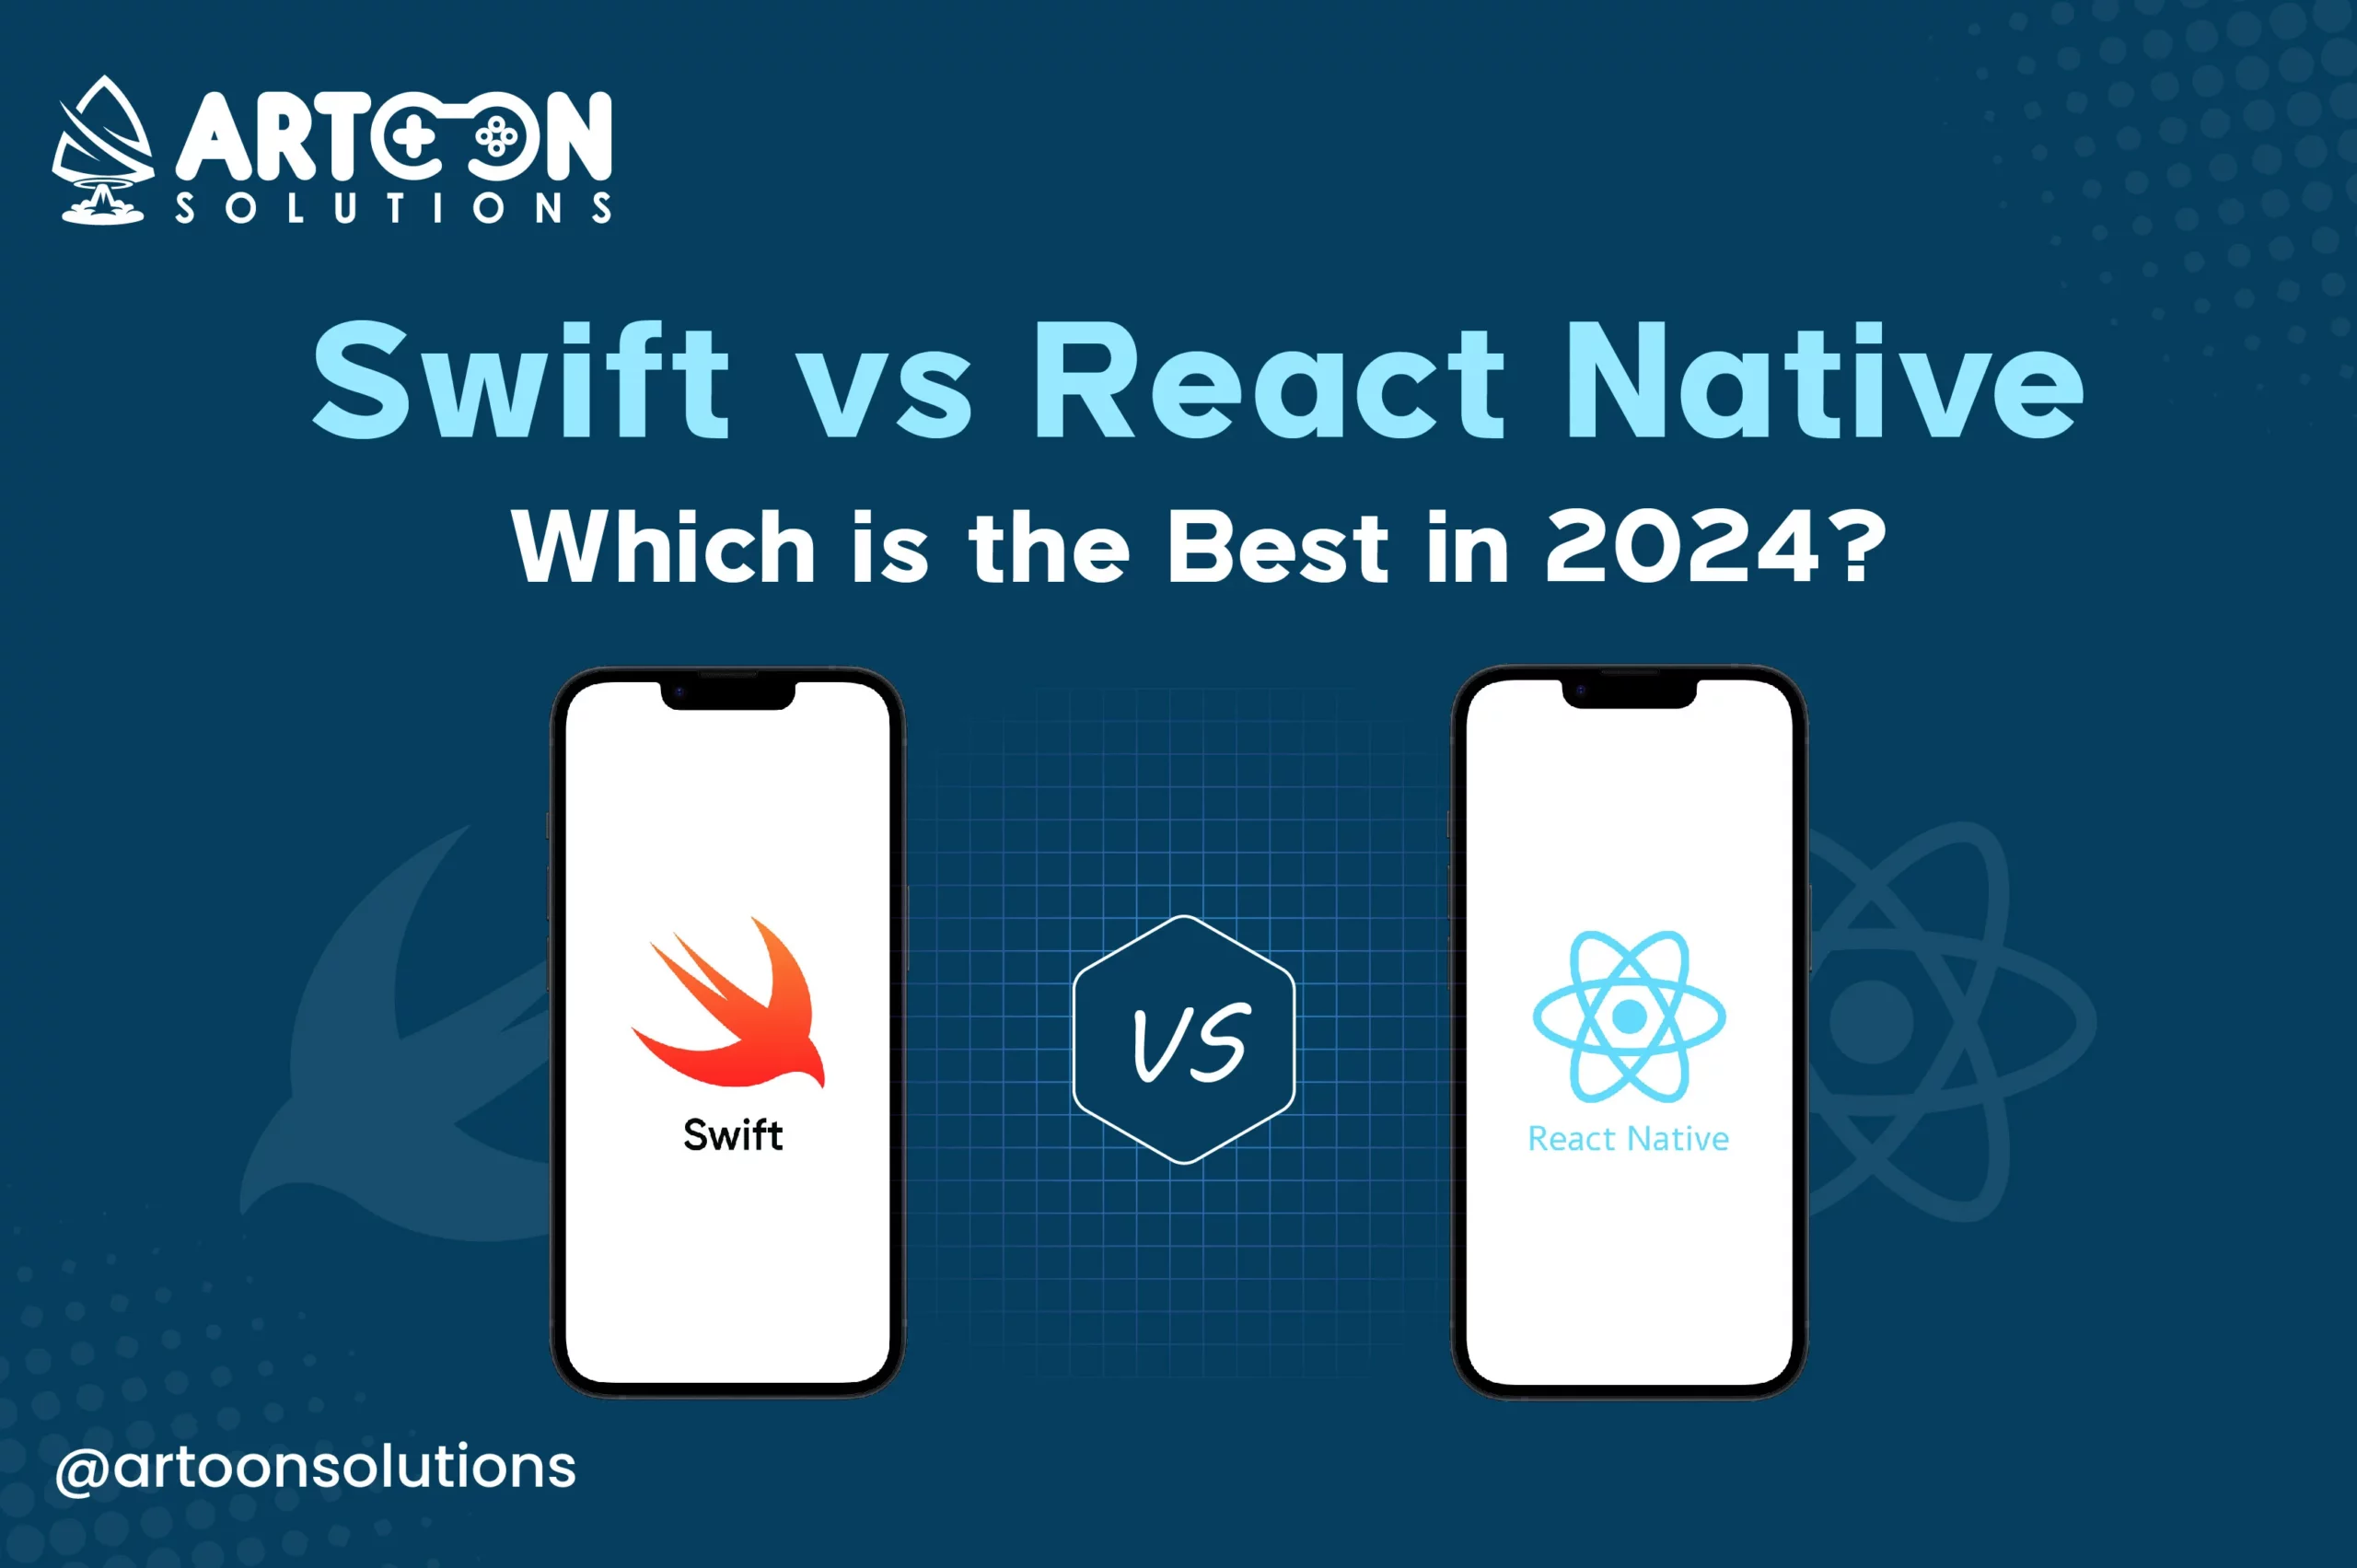 Swift vs React Native: Which is the Best in 2024?